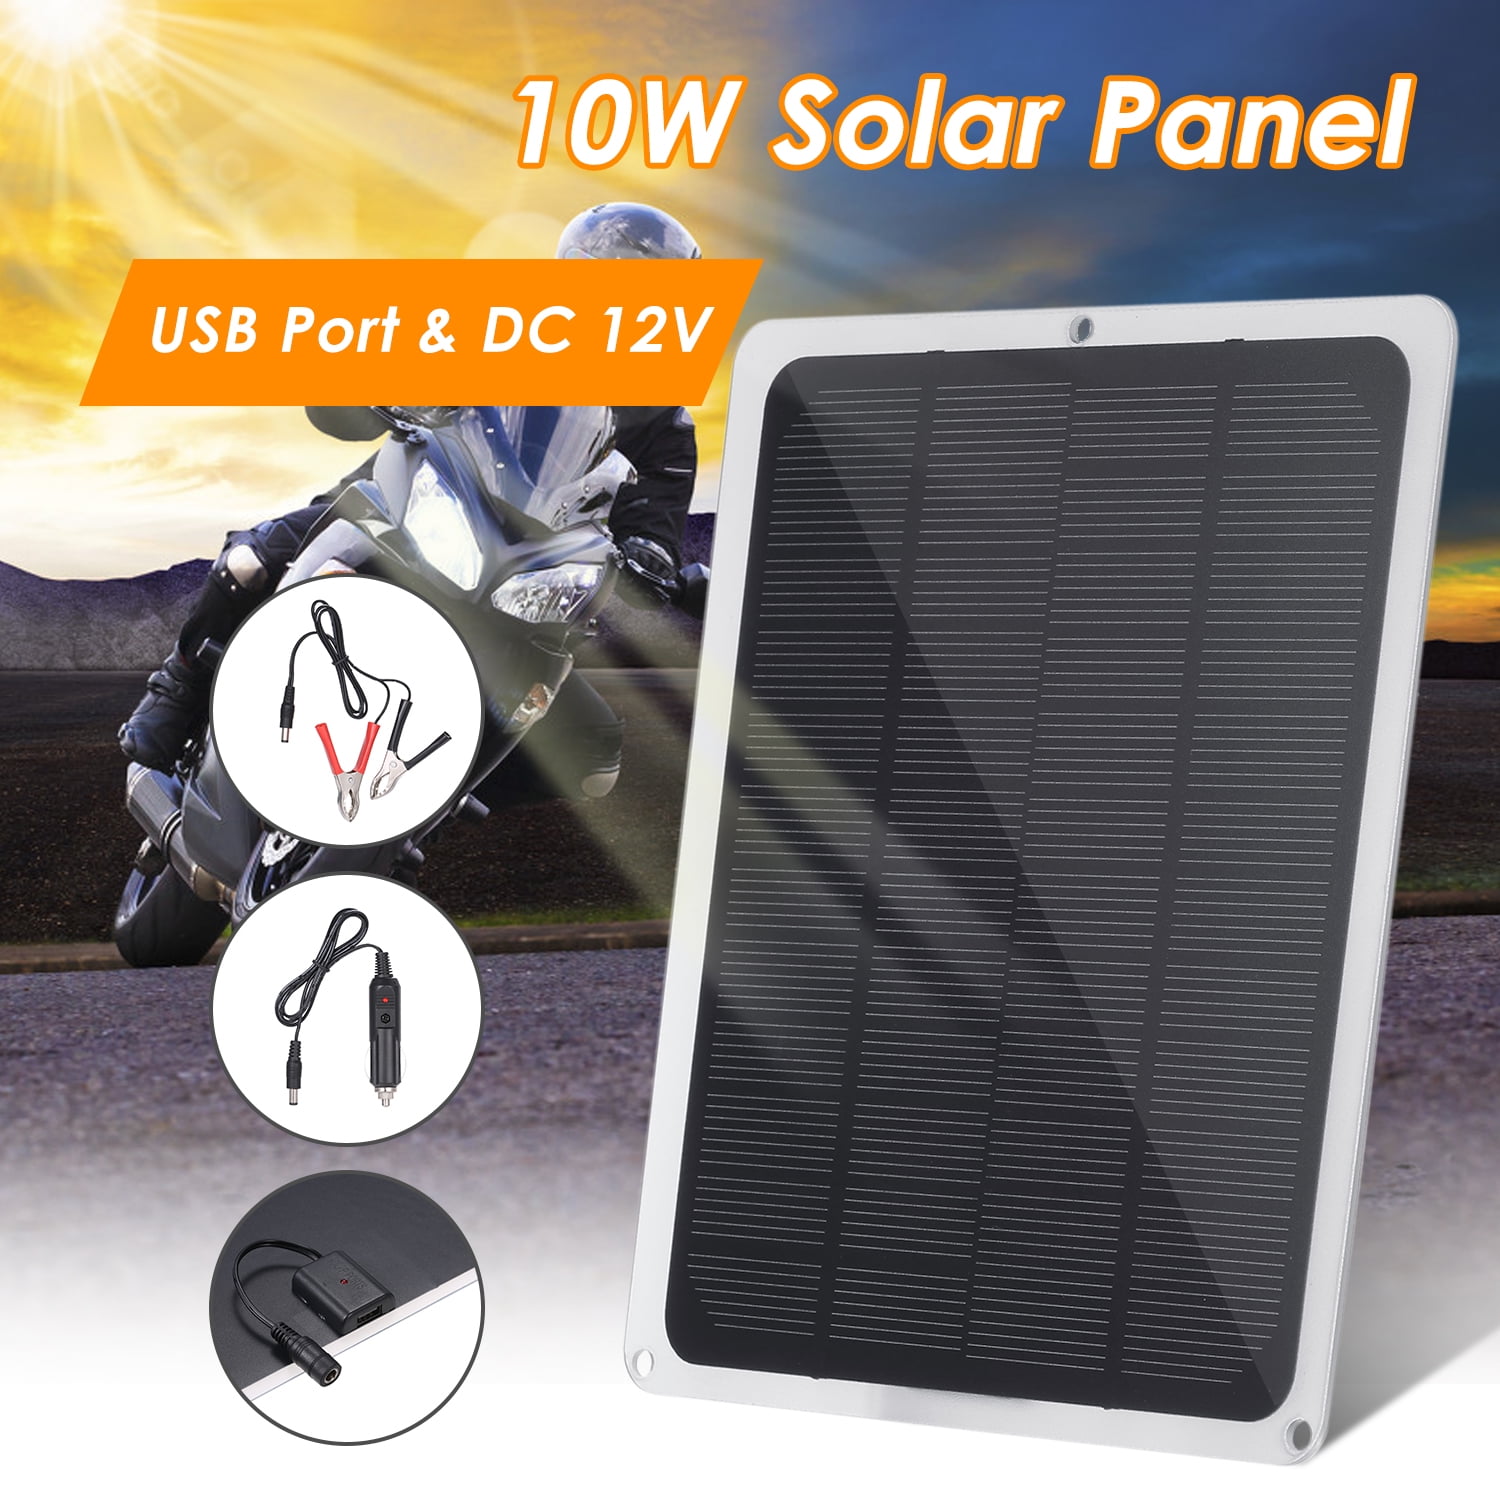 Portable Solar Panel Power Charger USB Camping Travel Phone Charge 5V/6V 1W/10W 